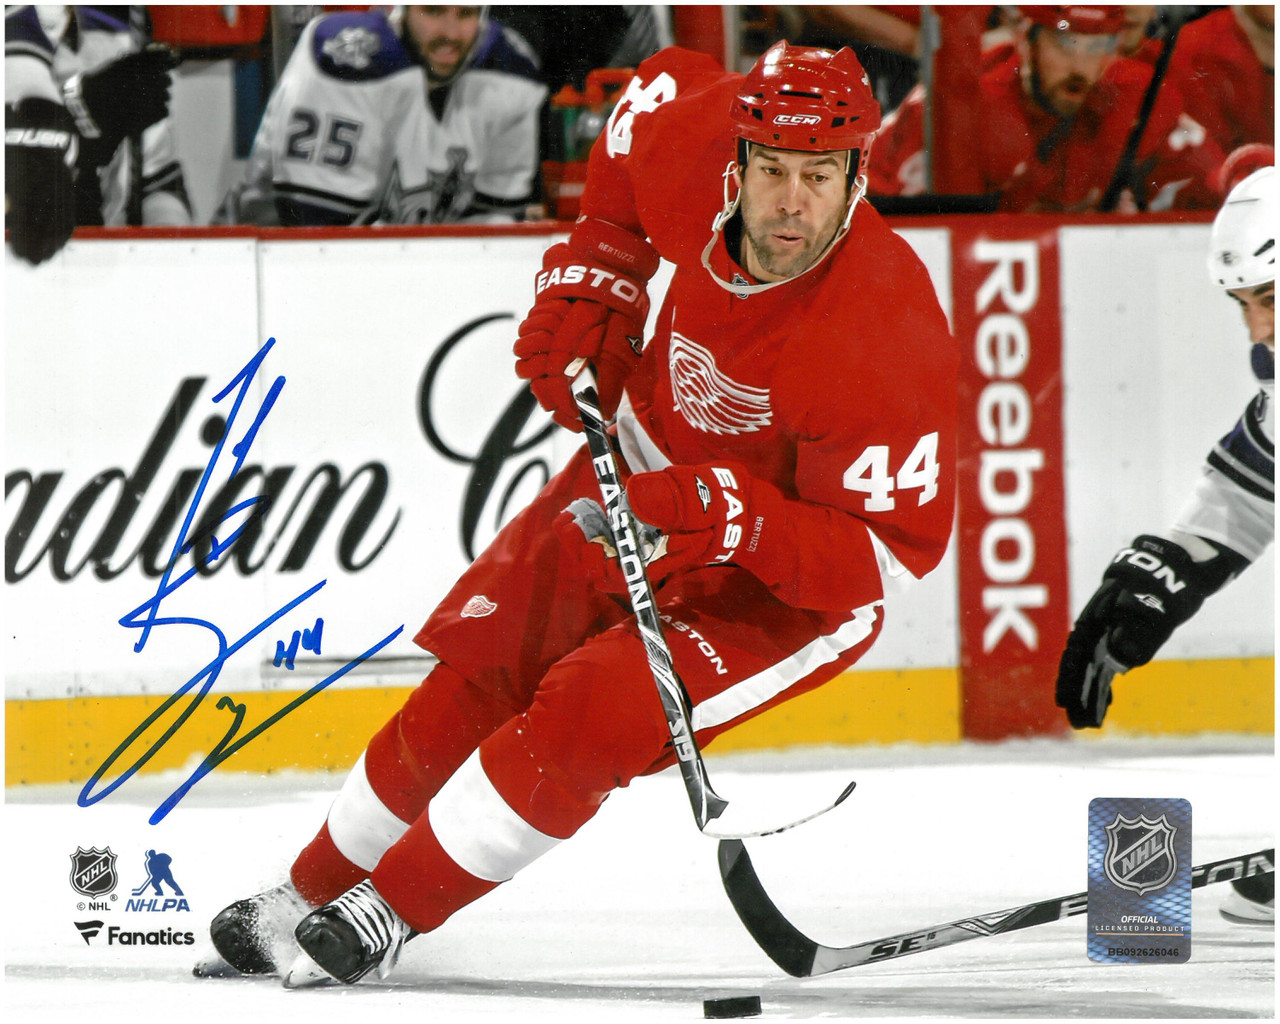 Todd Bertuzzi to make series debut Thursday for Red Wings - Sports